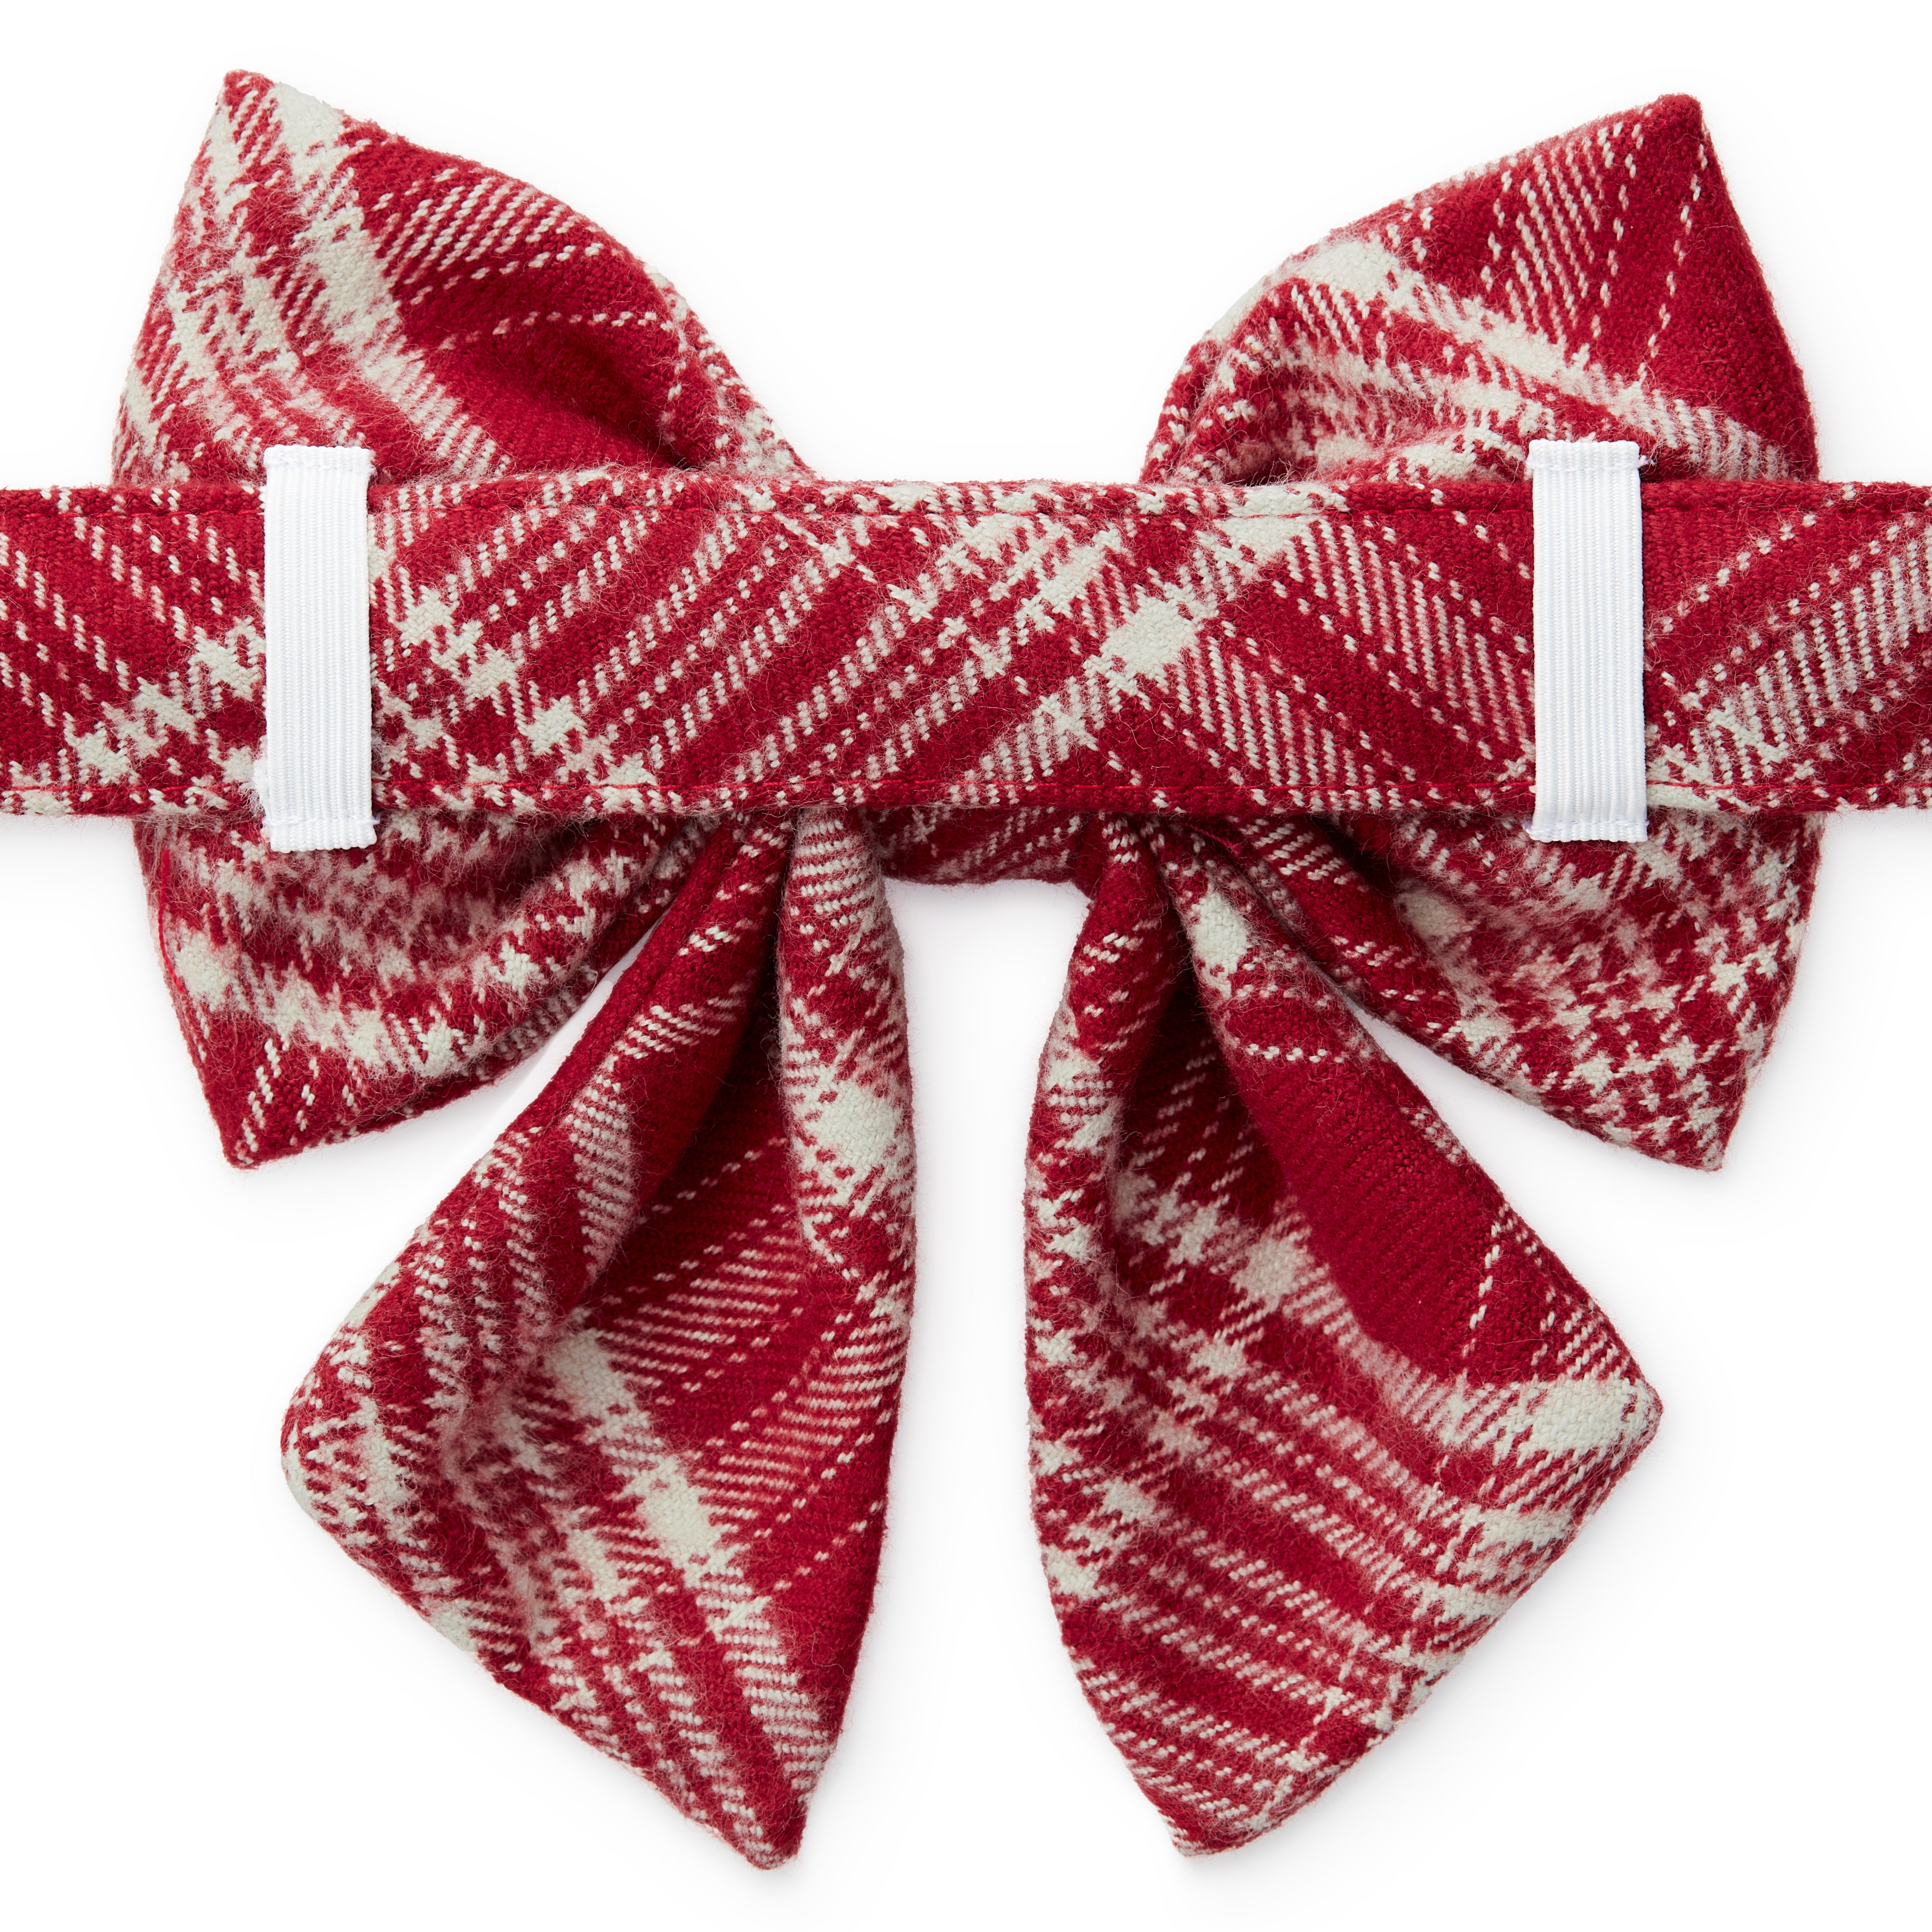 Dog and Cat Lady Bowtie: Marsala Plaid Flannel